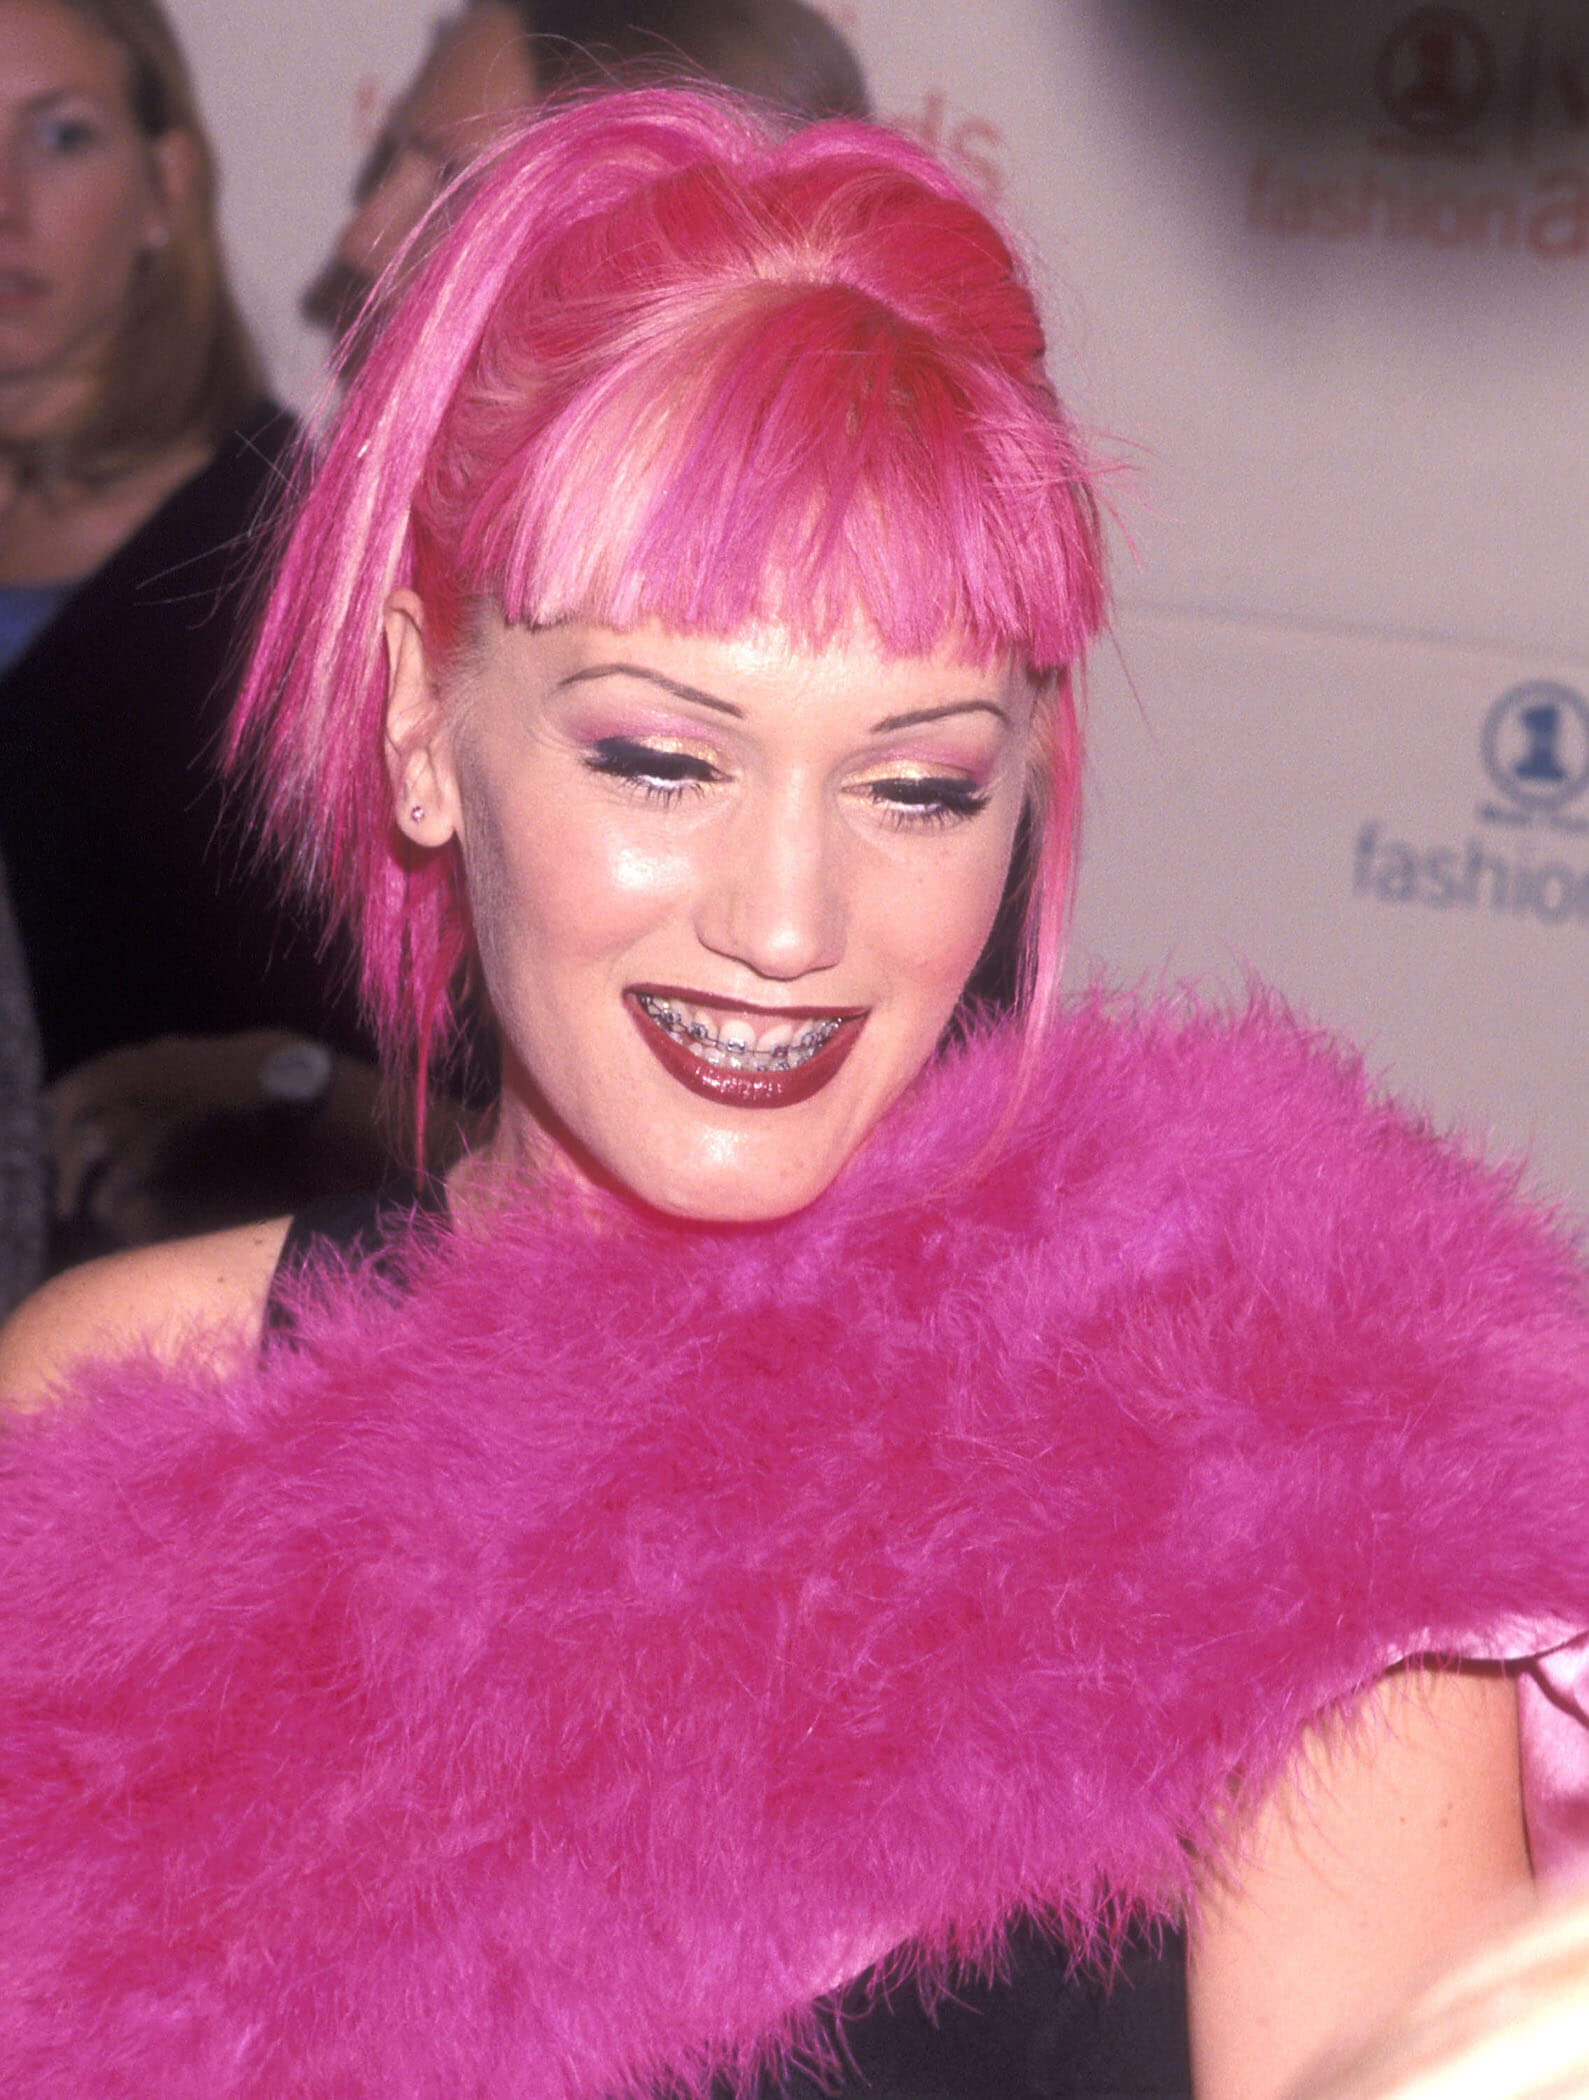 'The Voice' Season 24 coach Gwen Stefani of No Doubt attends the 1999 VH1/Vogue Fashion Awards. She has pink hair and braces.